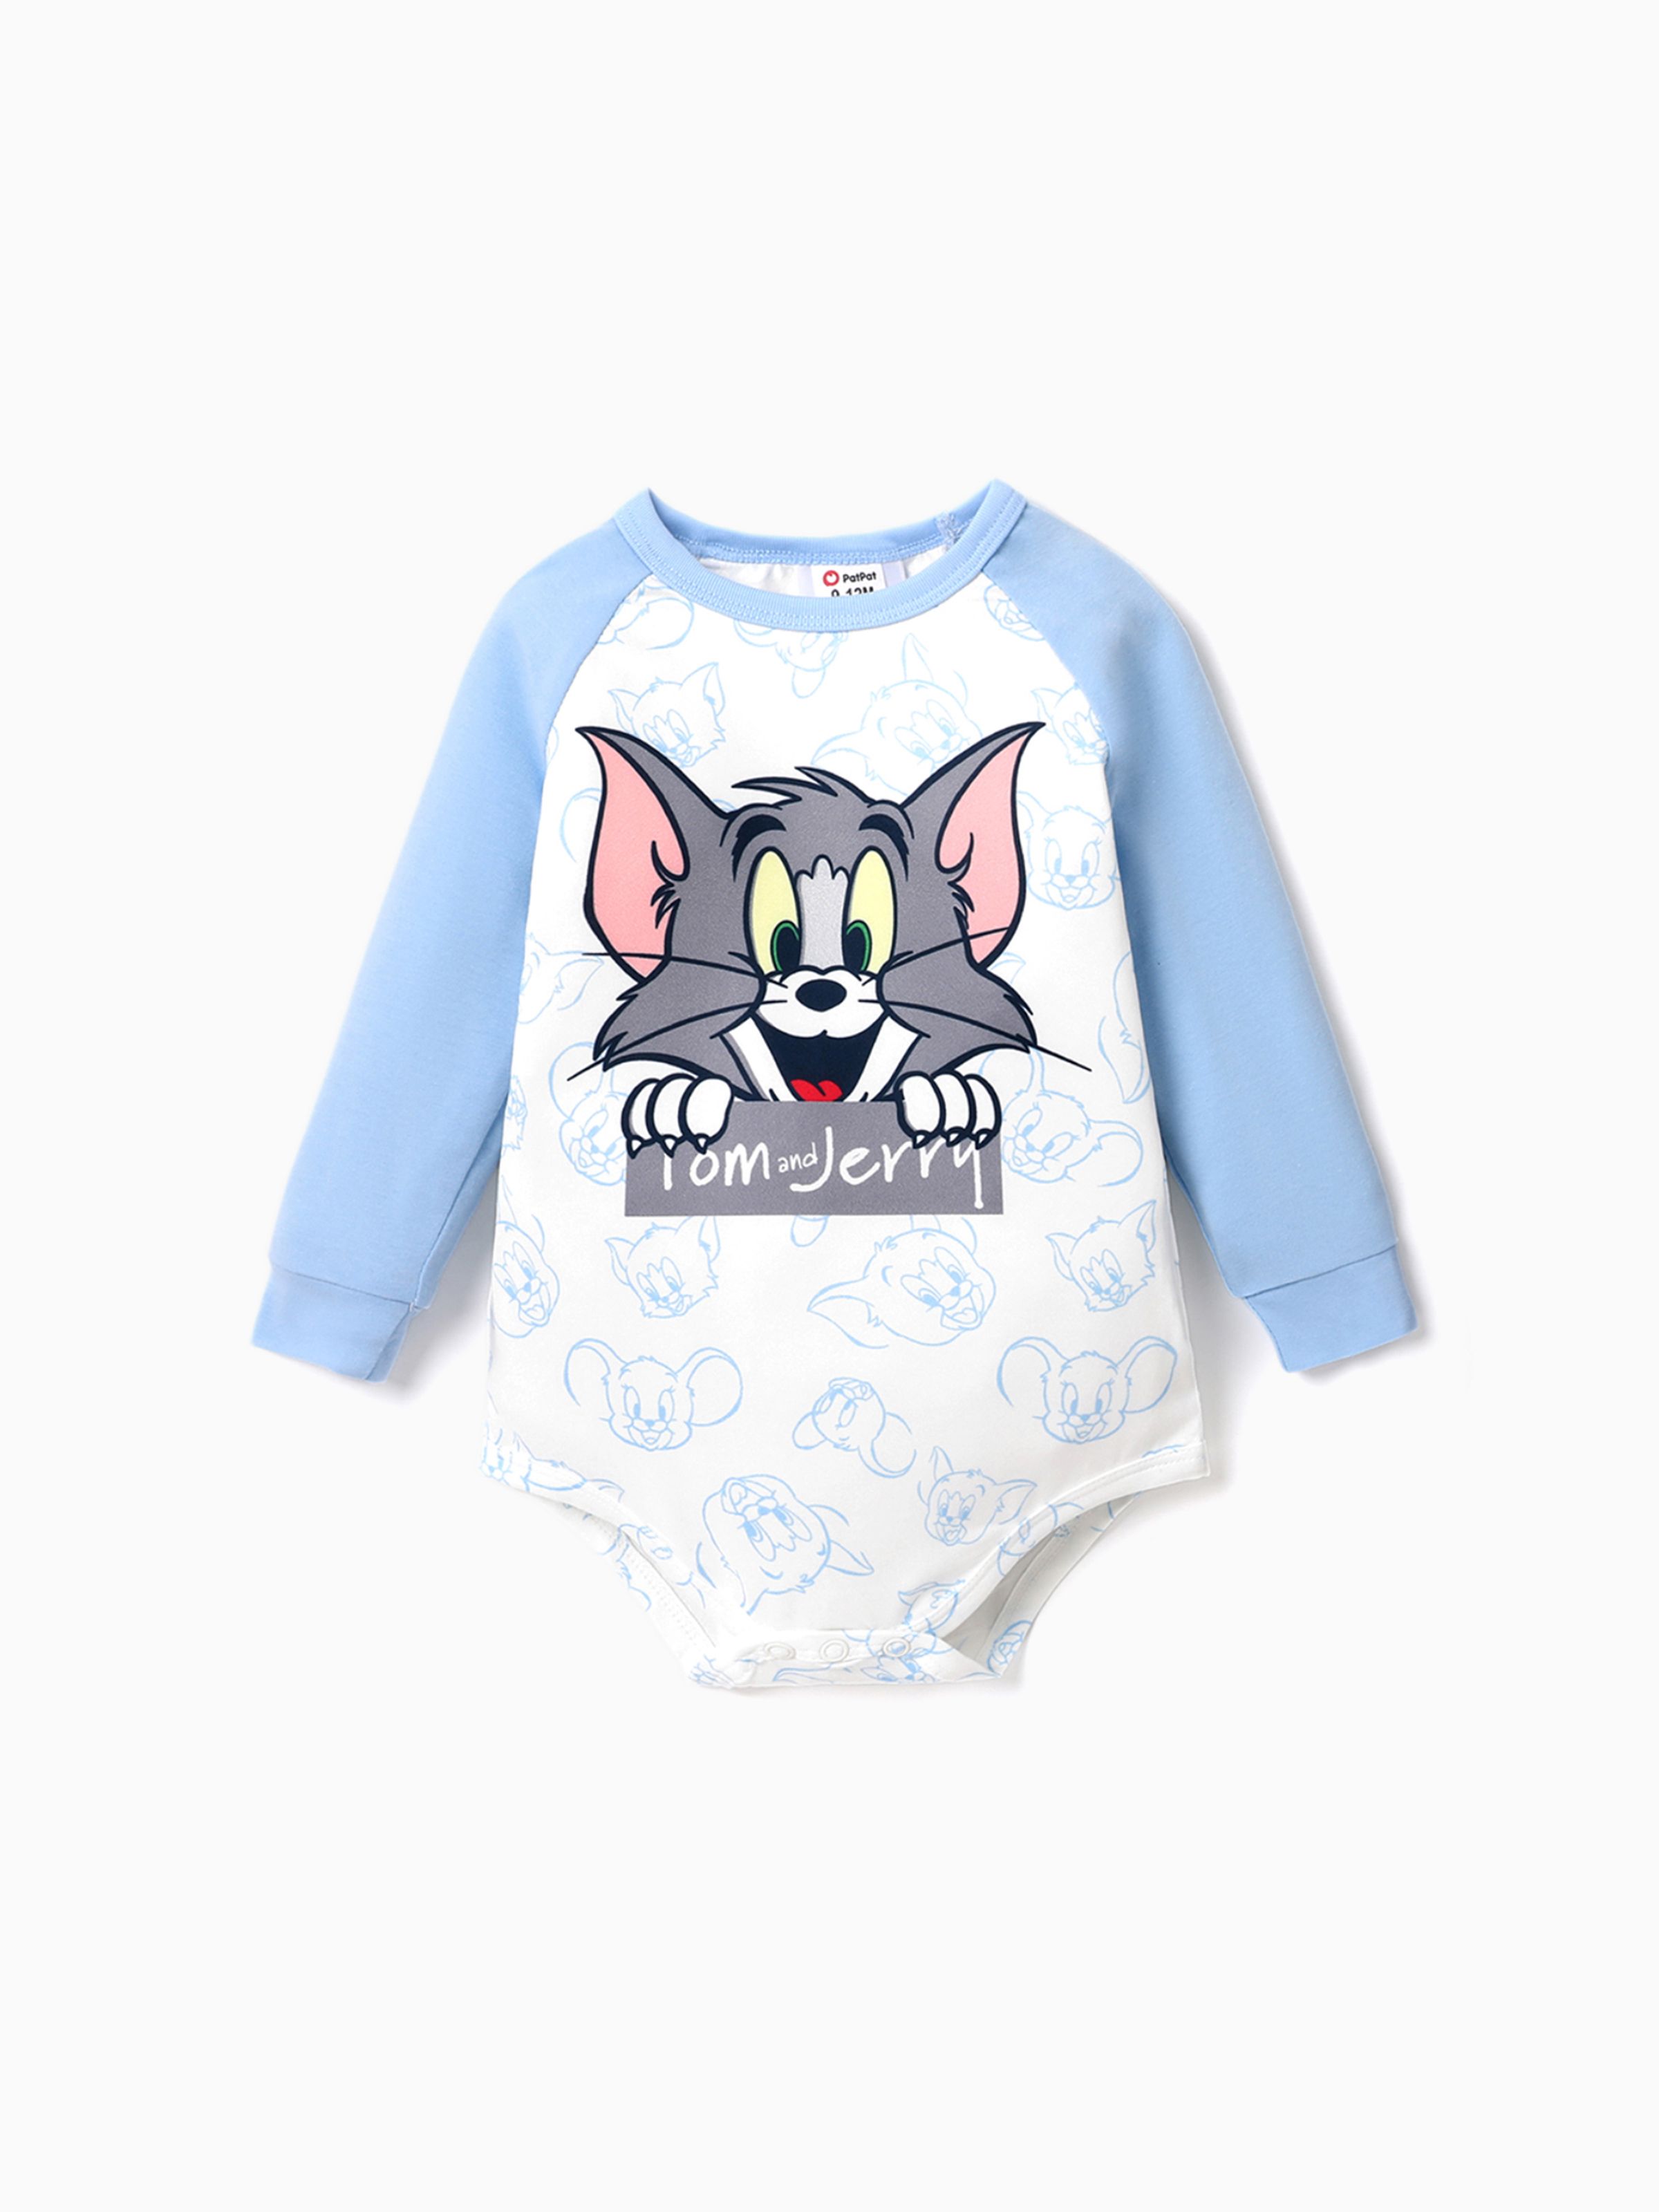 

Tom and Jerry baby boy character graphic A romper or a pair of pants to wear with